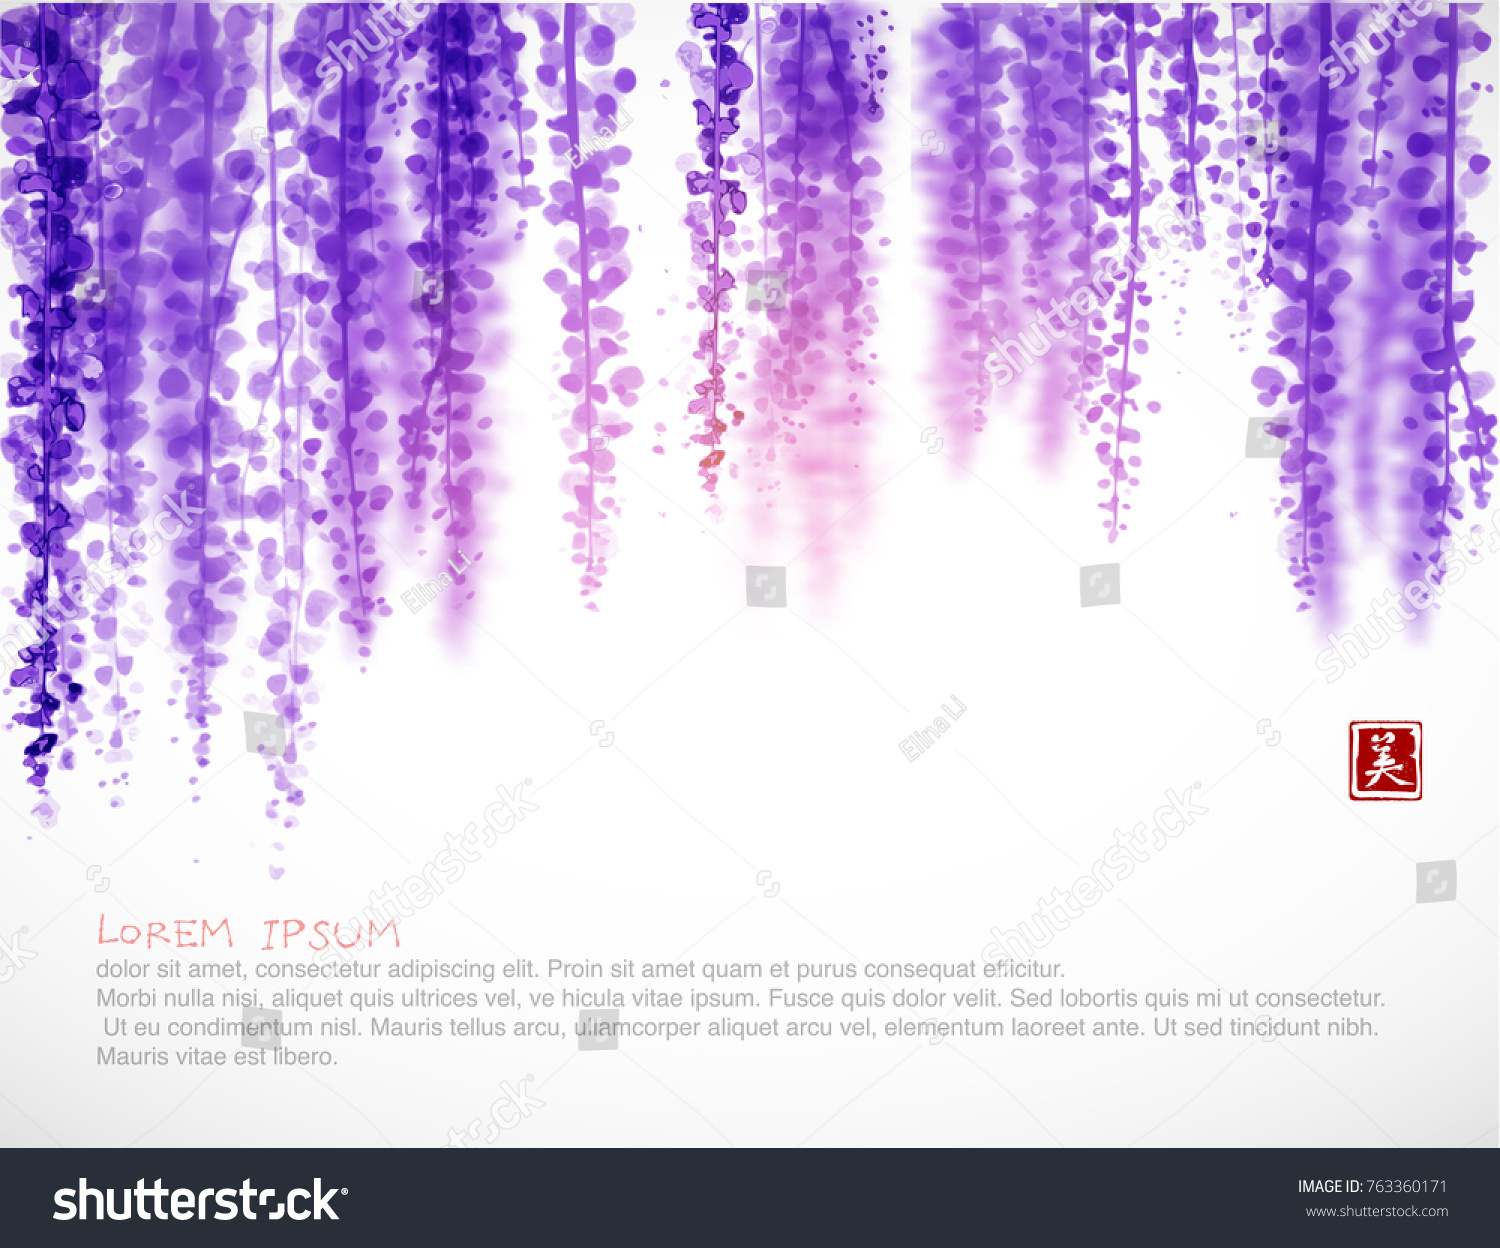 SVG of Wisteria blossom on white background. Traditional oriental ink painting sumi-e, u-sin, go-hua. Contains hieroglyph - beauty. svg